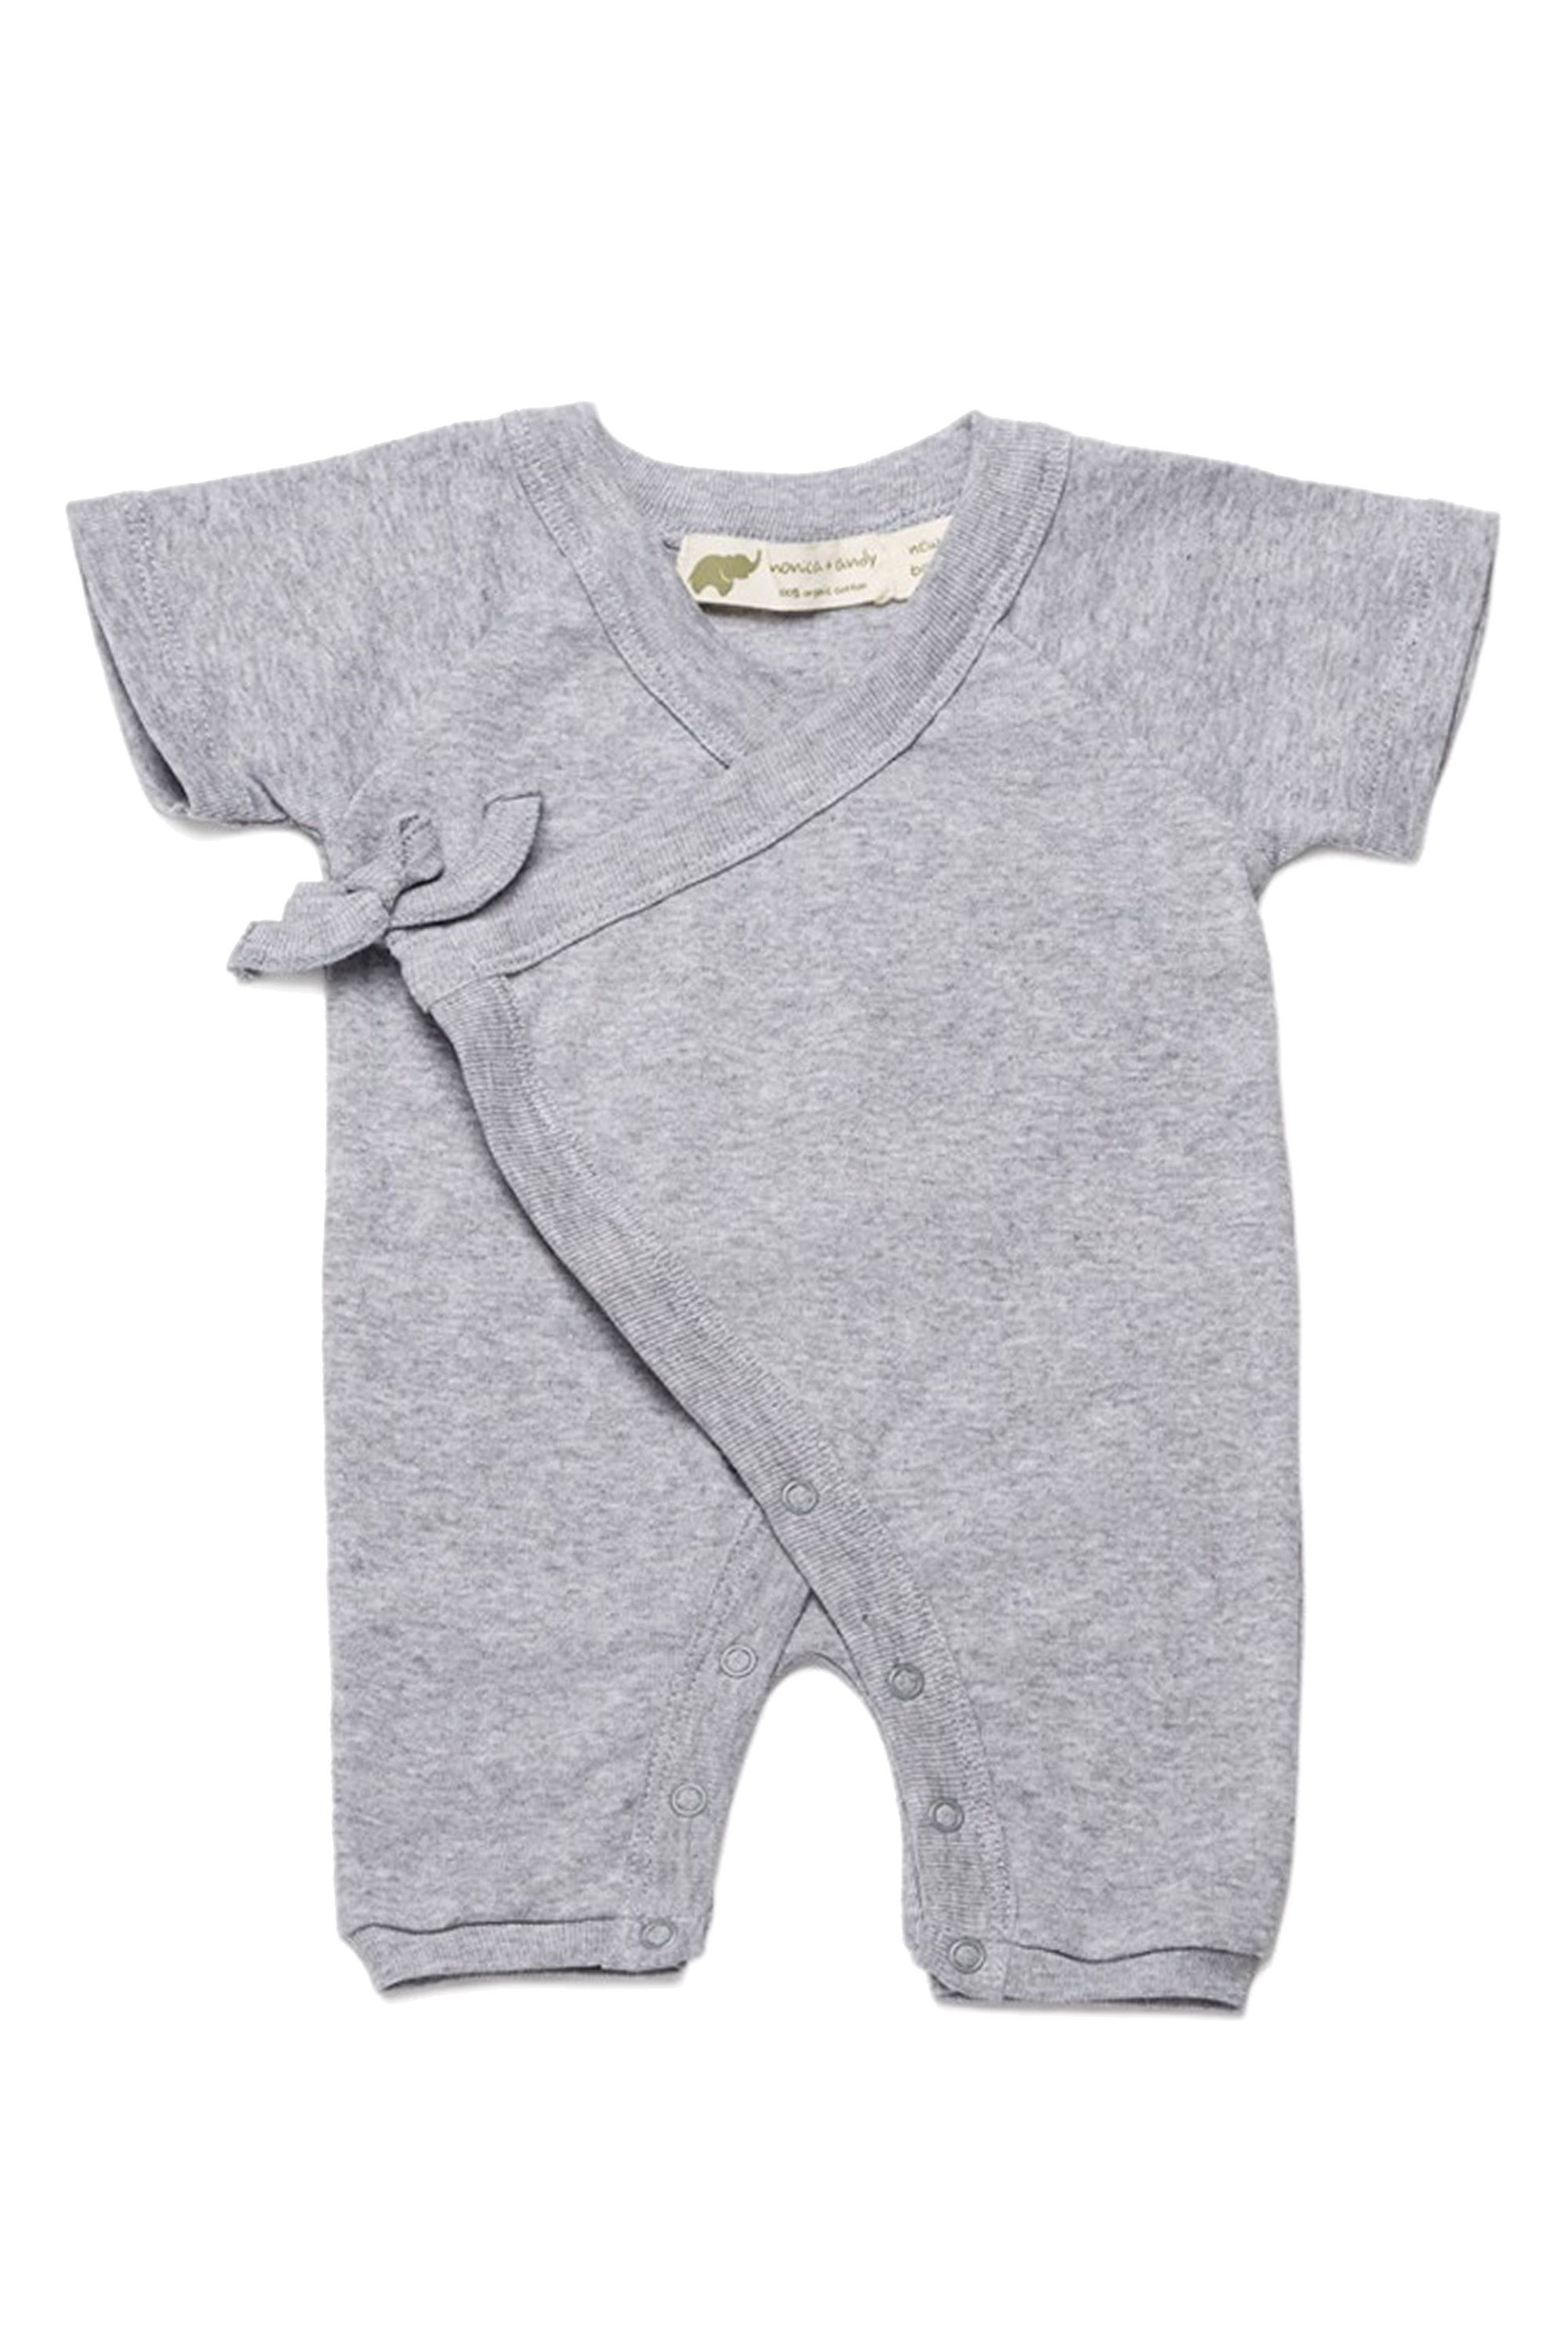 25 Designer Baby Clothes That Are Too Adorable to Exist - 25